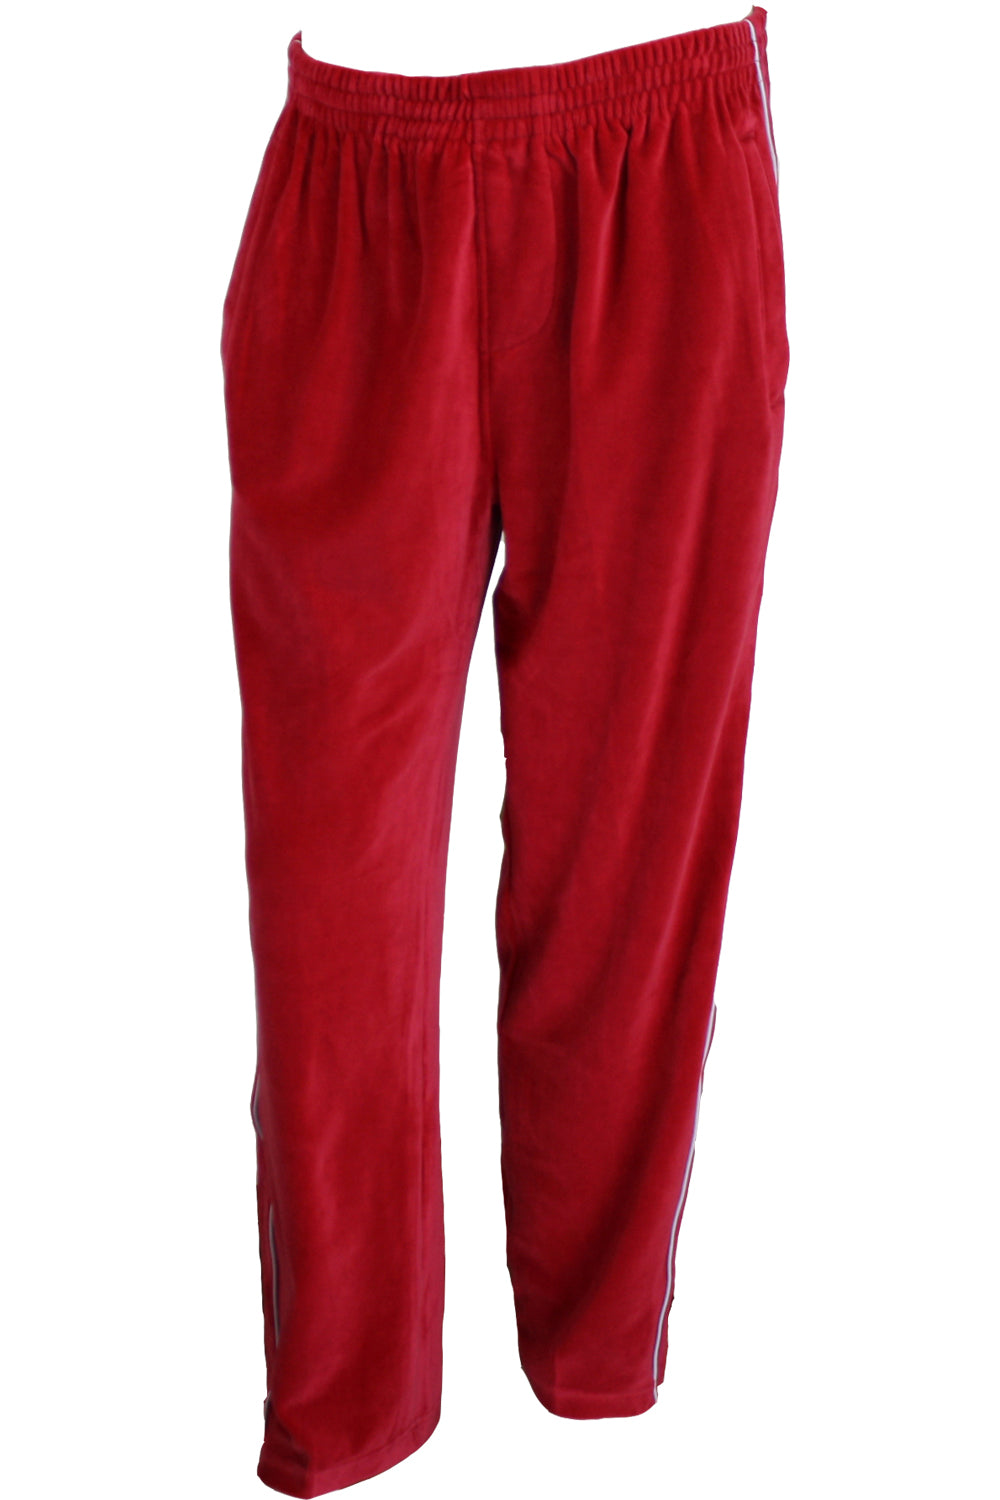 Red Slim Fit Cotton Pants for Men by GentWith.com